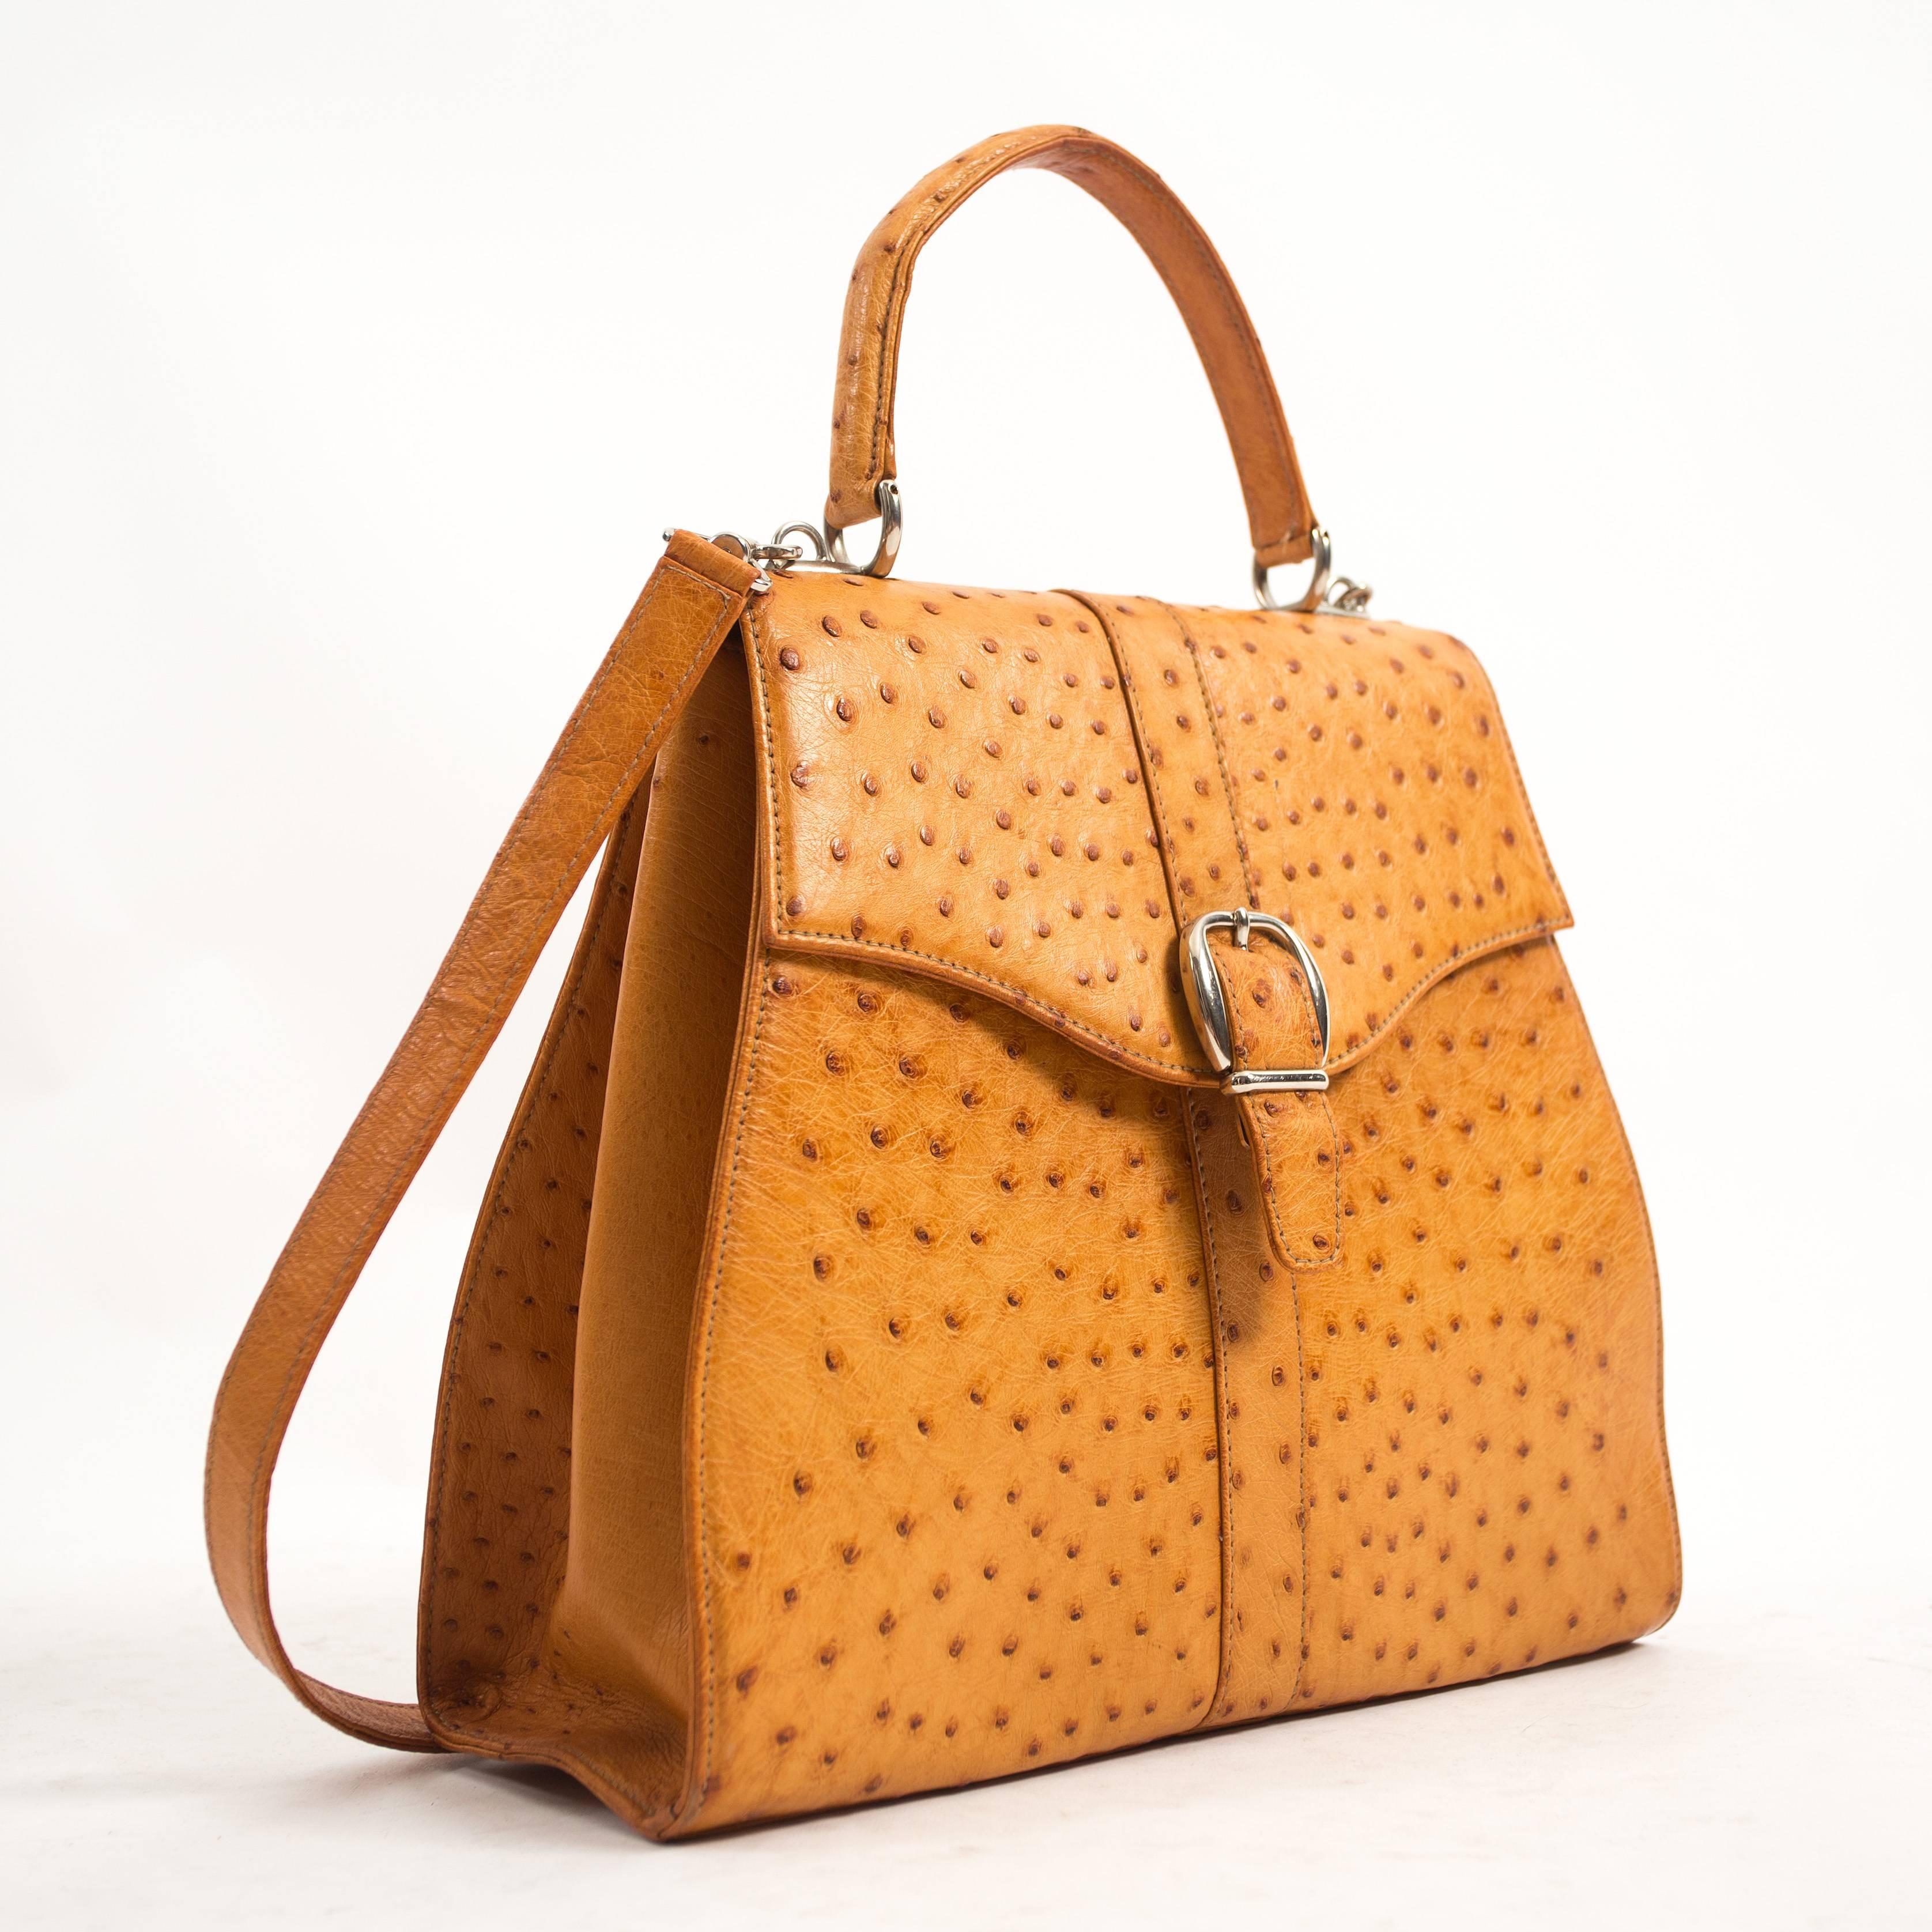 Gucci 1970s tan ostrich leather hand bag with shoulder strap, suede interior and matching mirror with leather case 